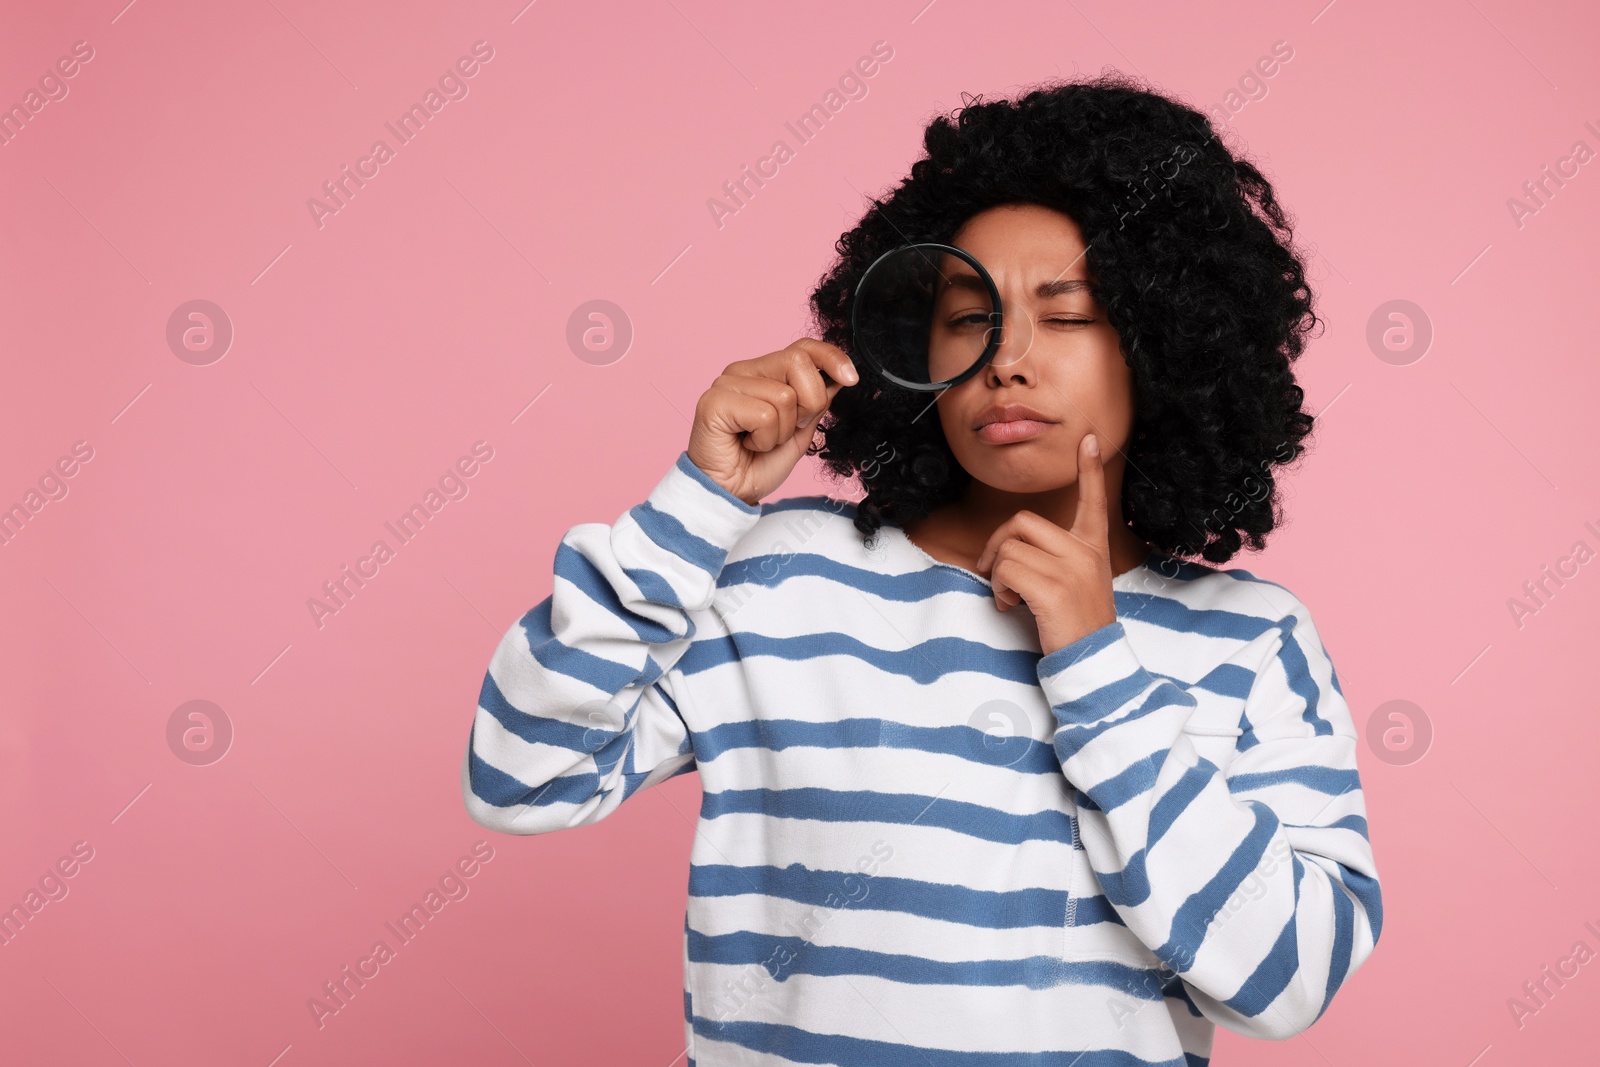 Photo of Woman looking through magnifier glass on pink background, space for text